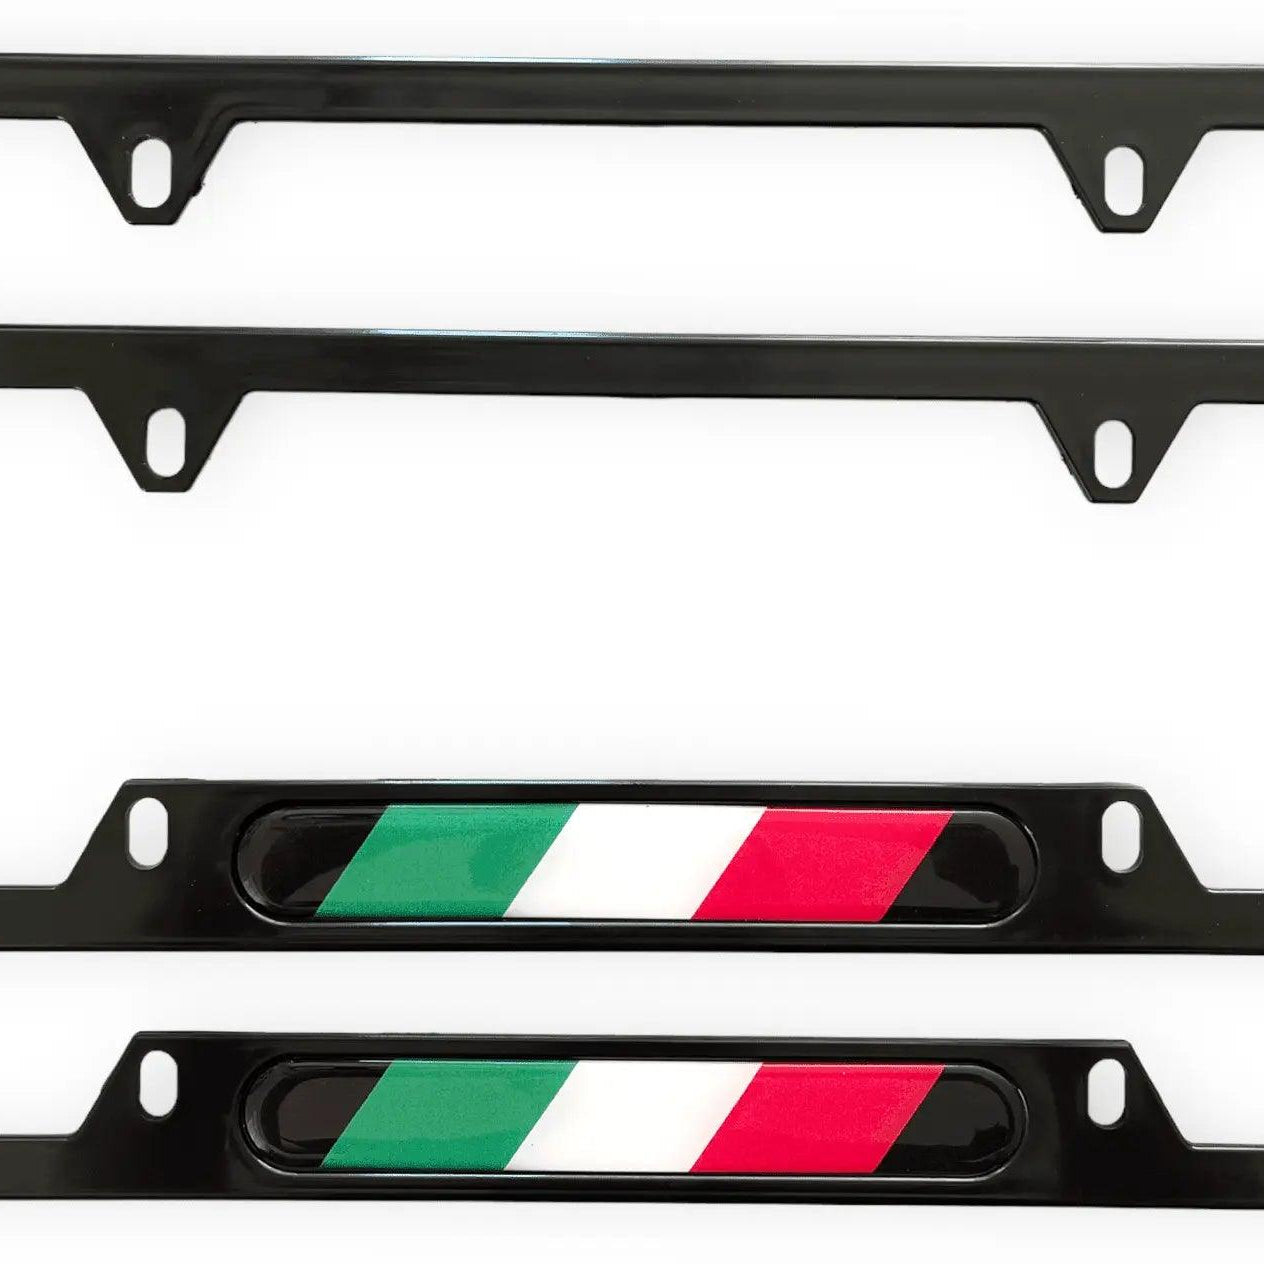 Autowin Number Plate Holder USA Standard Size Italy Flag